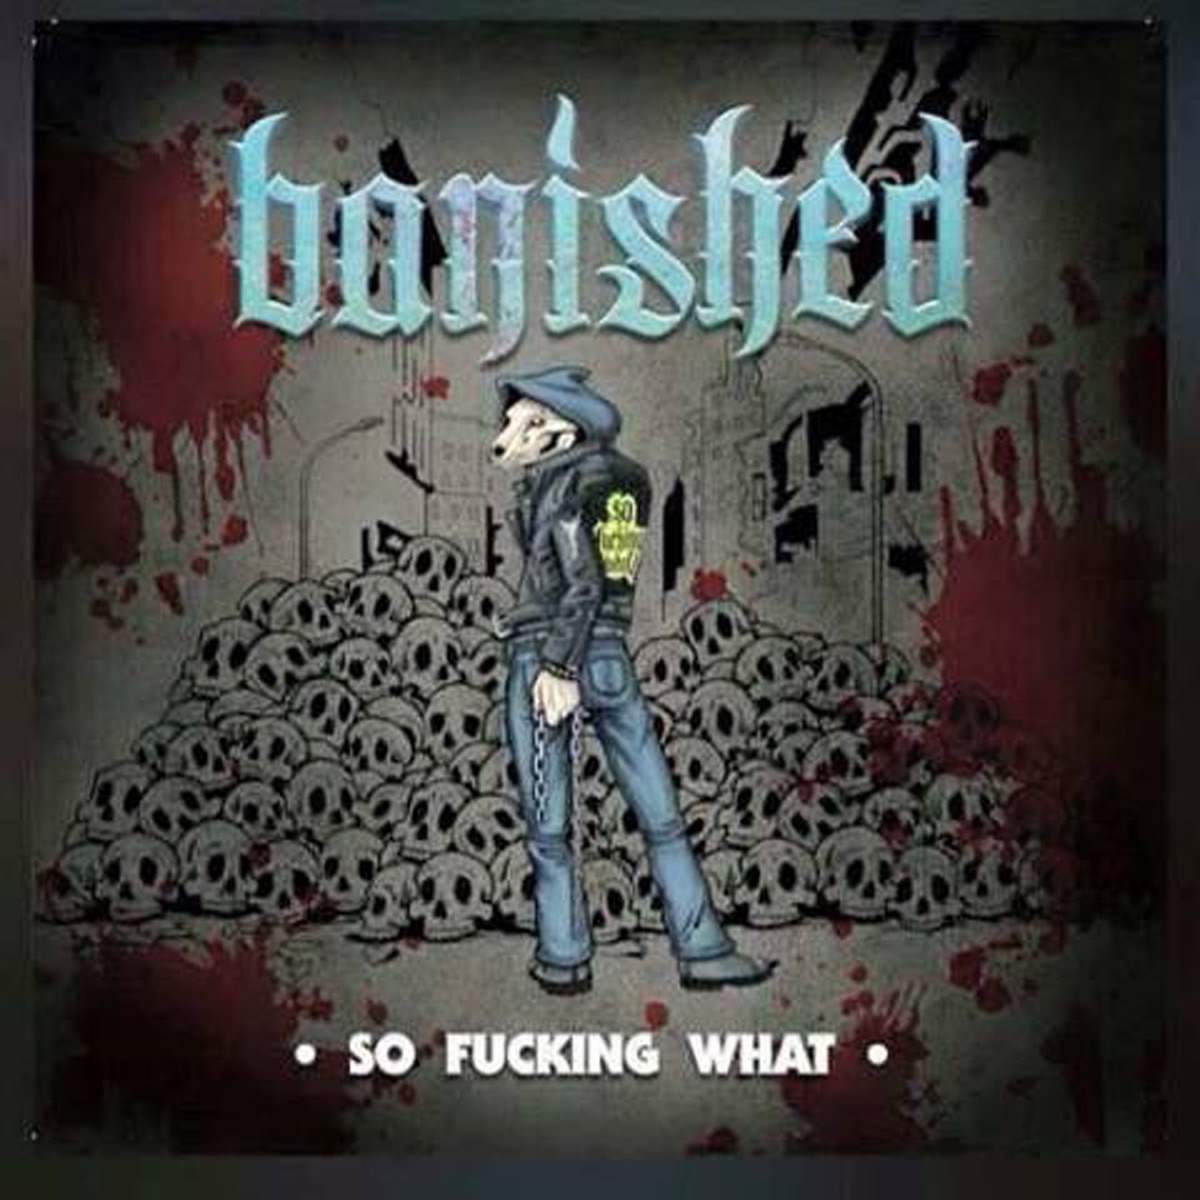 So Fucking What - EP - Album by Banished - Apple Music